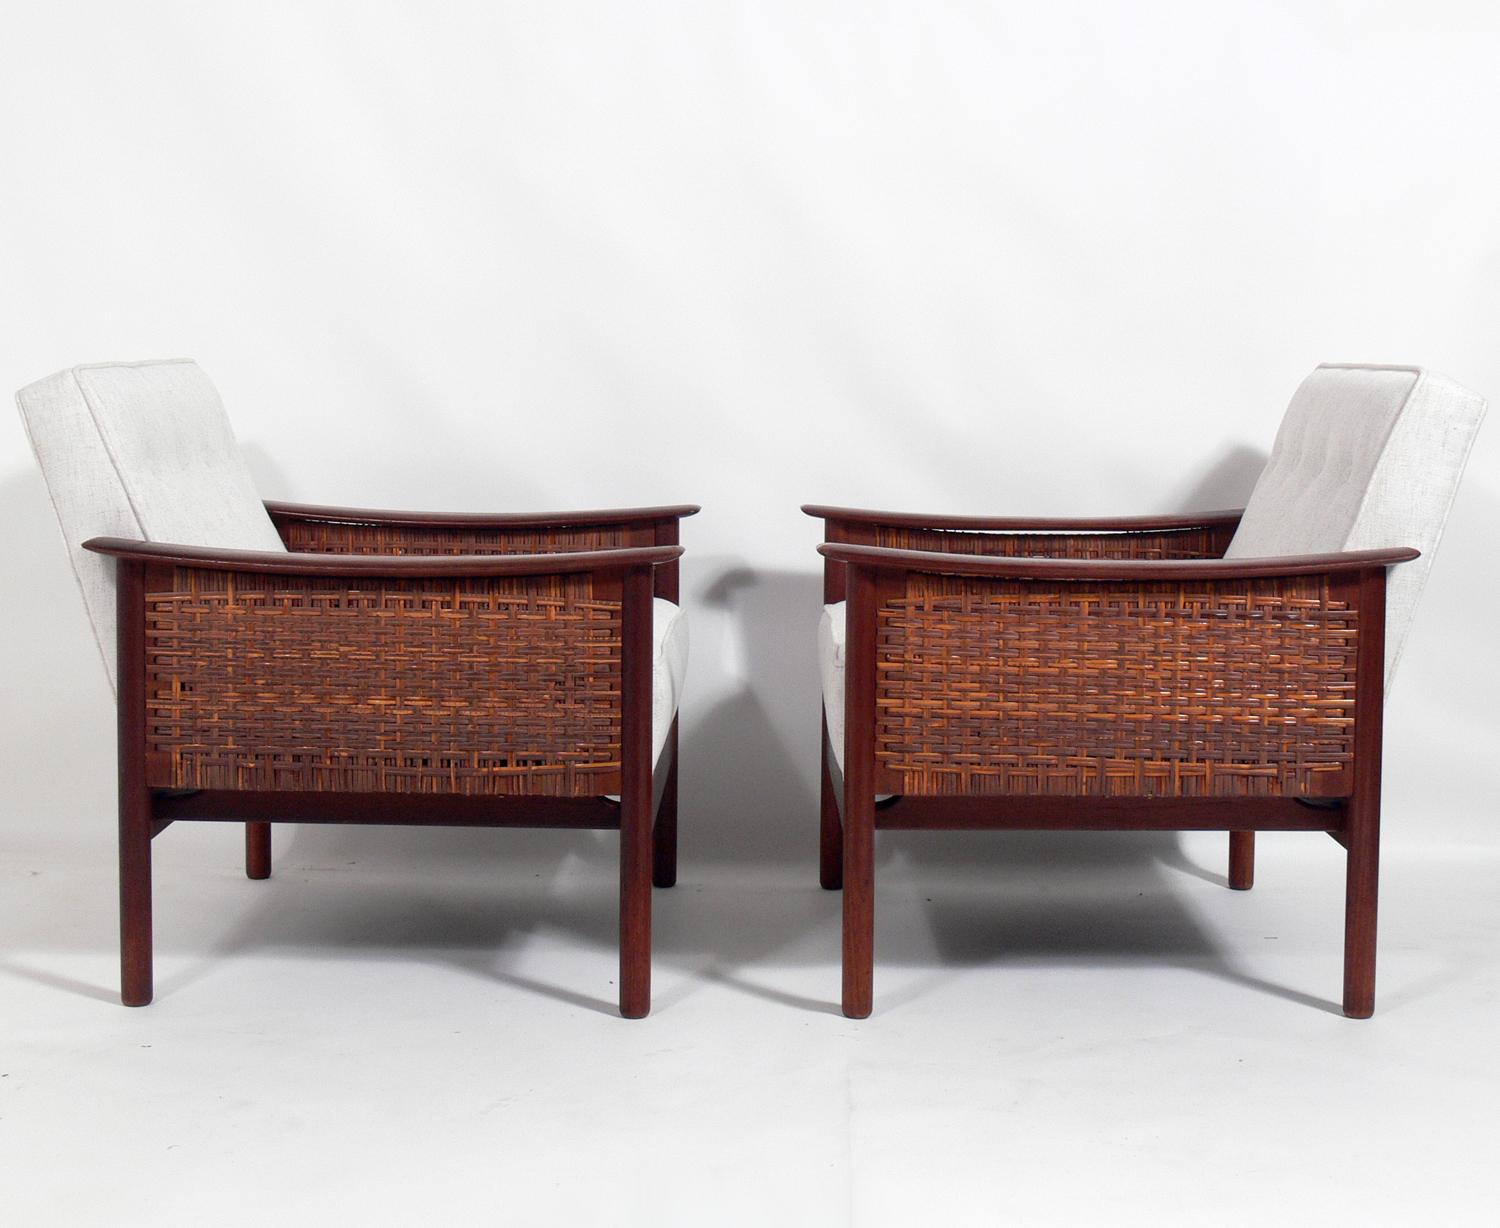 Pair of Danish modern caned lounge chairs, Denmark, circa 1960s. They have been recently reupholstered in an ivory color herringbone fabric. The teak frames have been cleaned and Danish oiled.